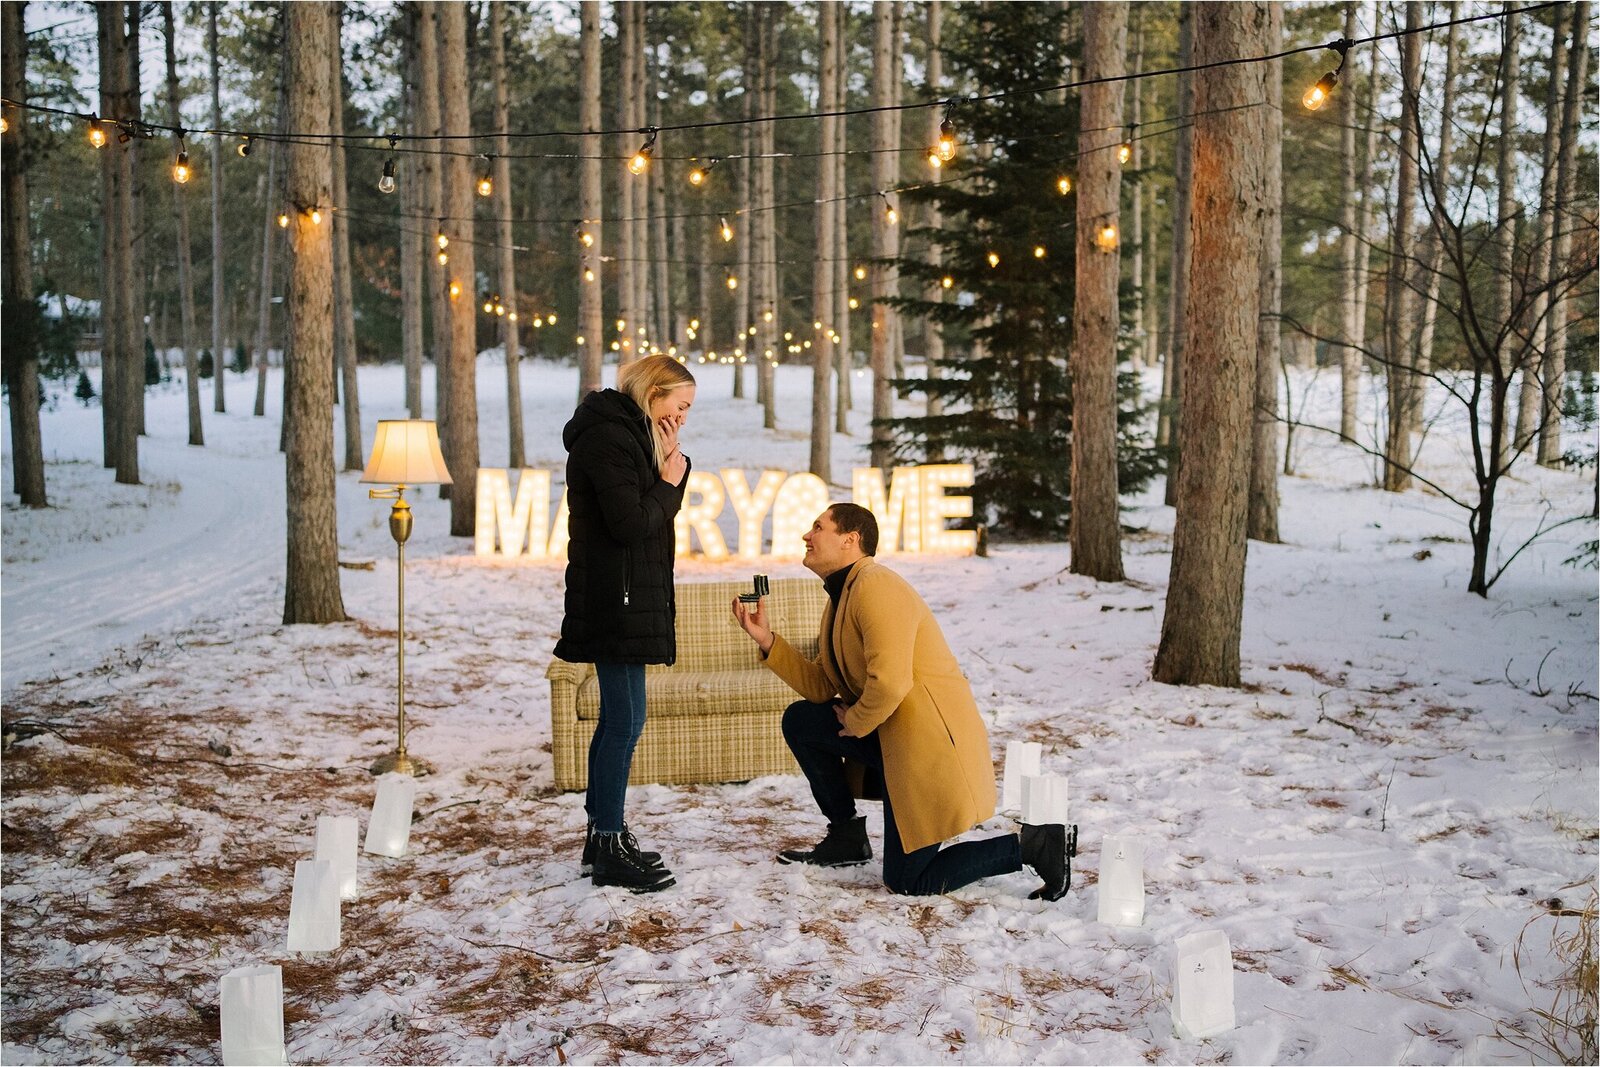 Magical-Woods-Proposal-25